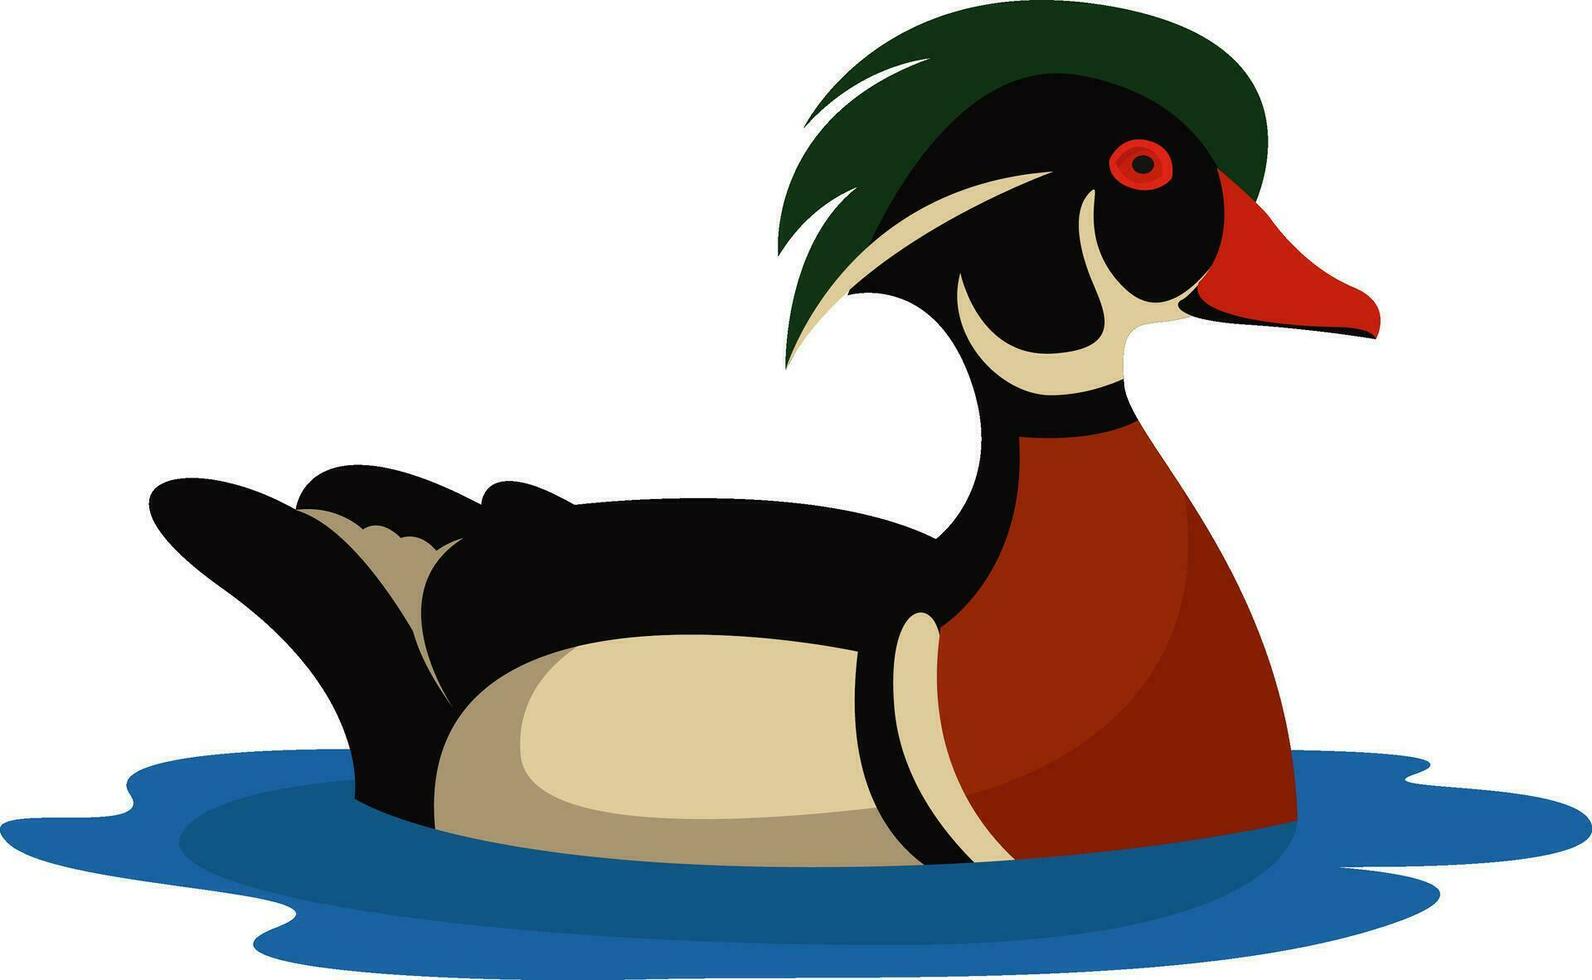 Duck in the water, illustration, vector on white background